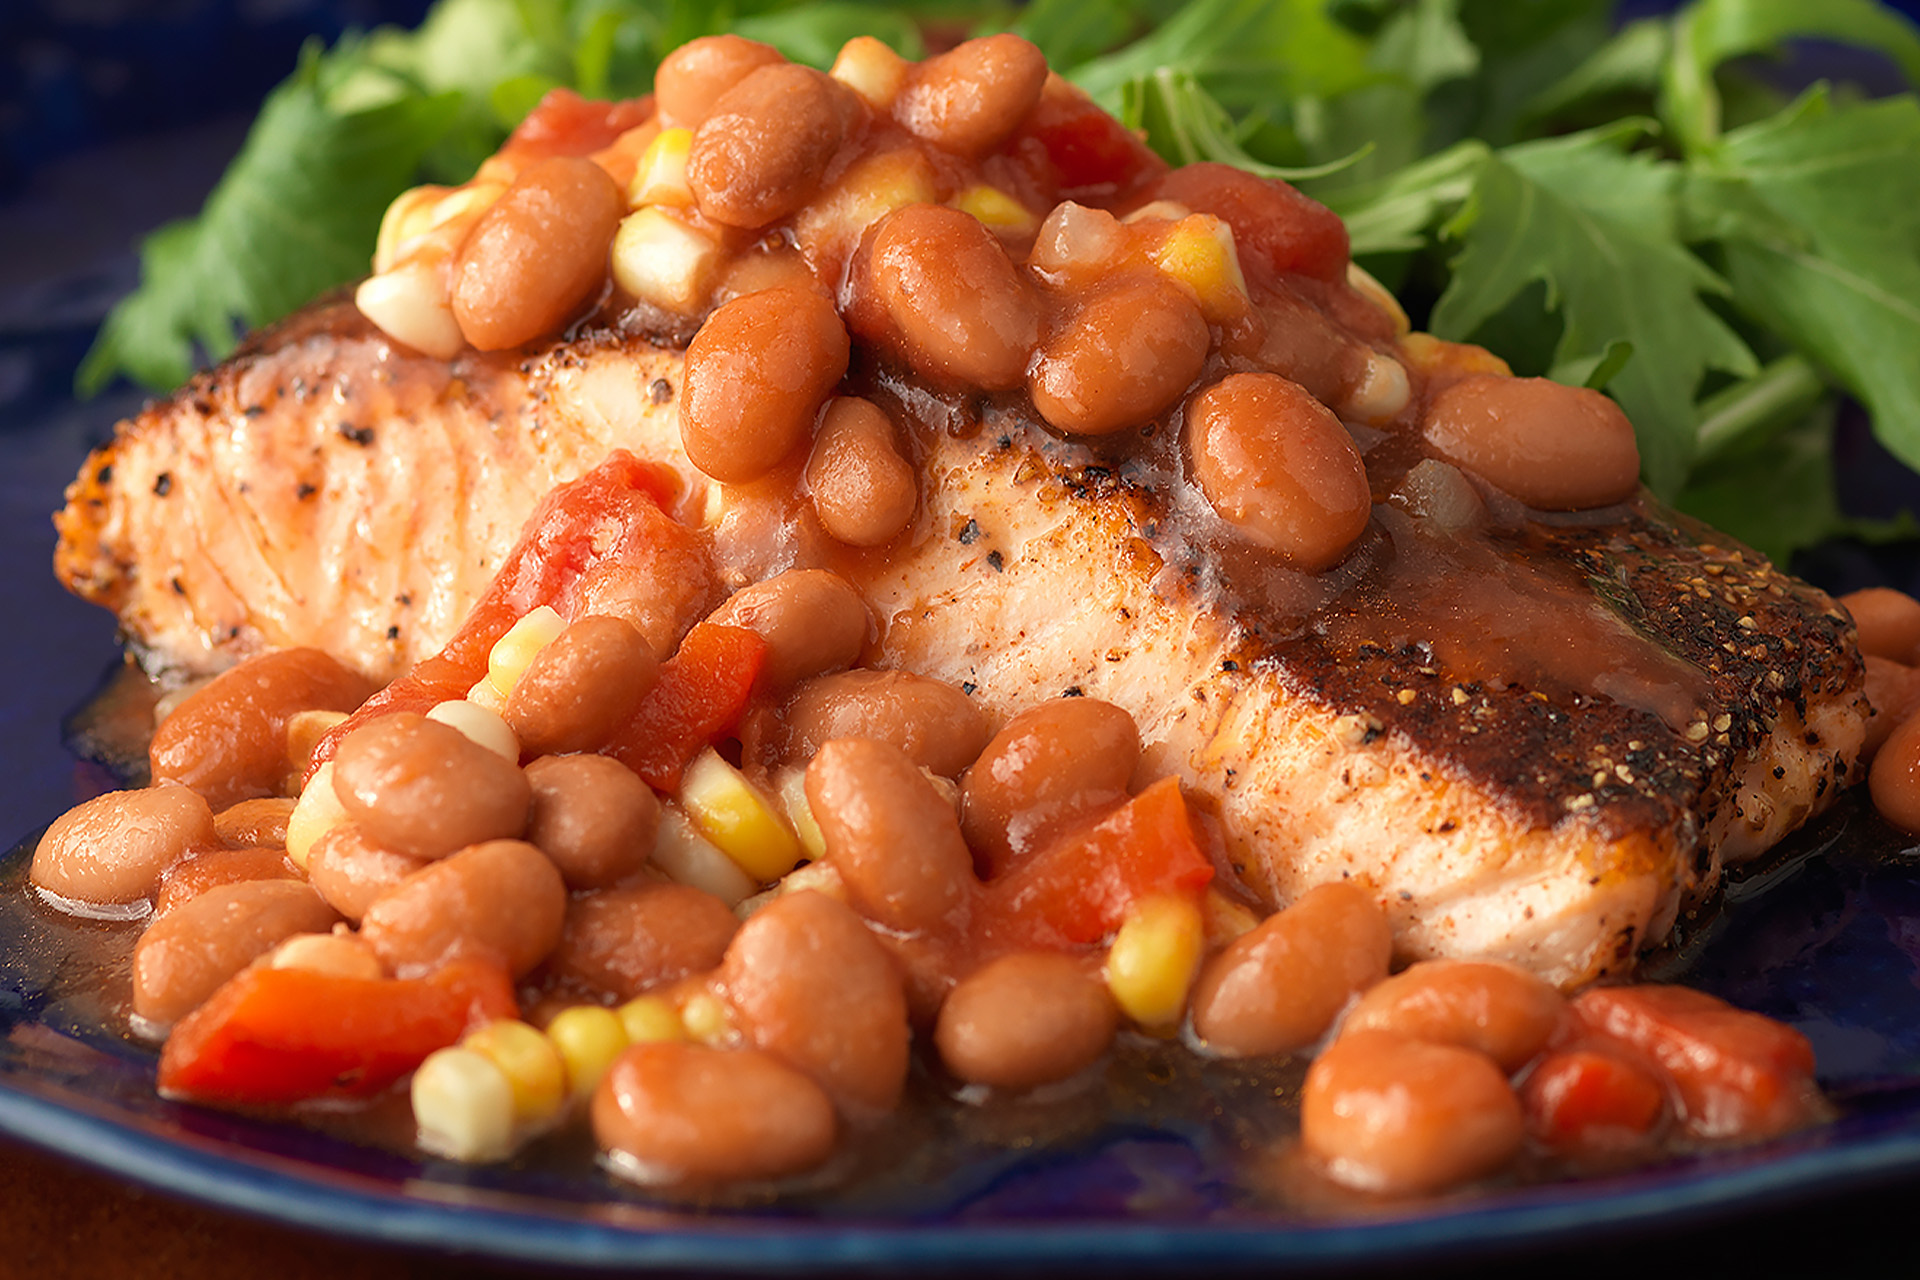 Pepper crusted salmon with pinto beans and greens on blue plate